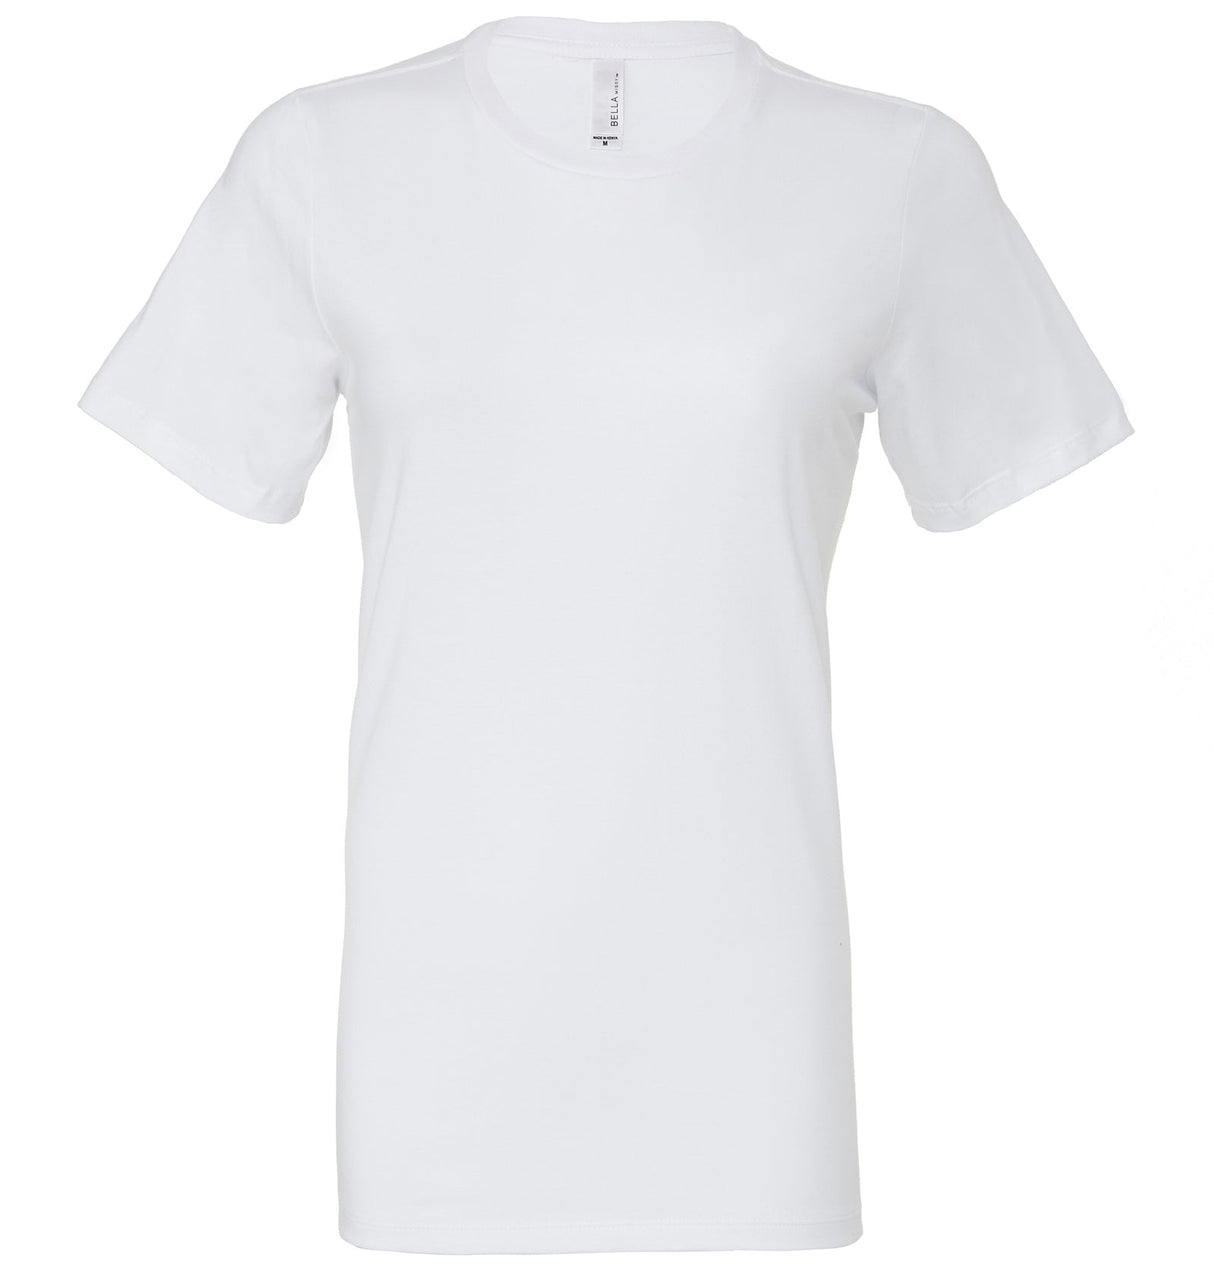 Bella Canvas Women's Relaxed Jersey Short Sleeve Tee - White